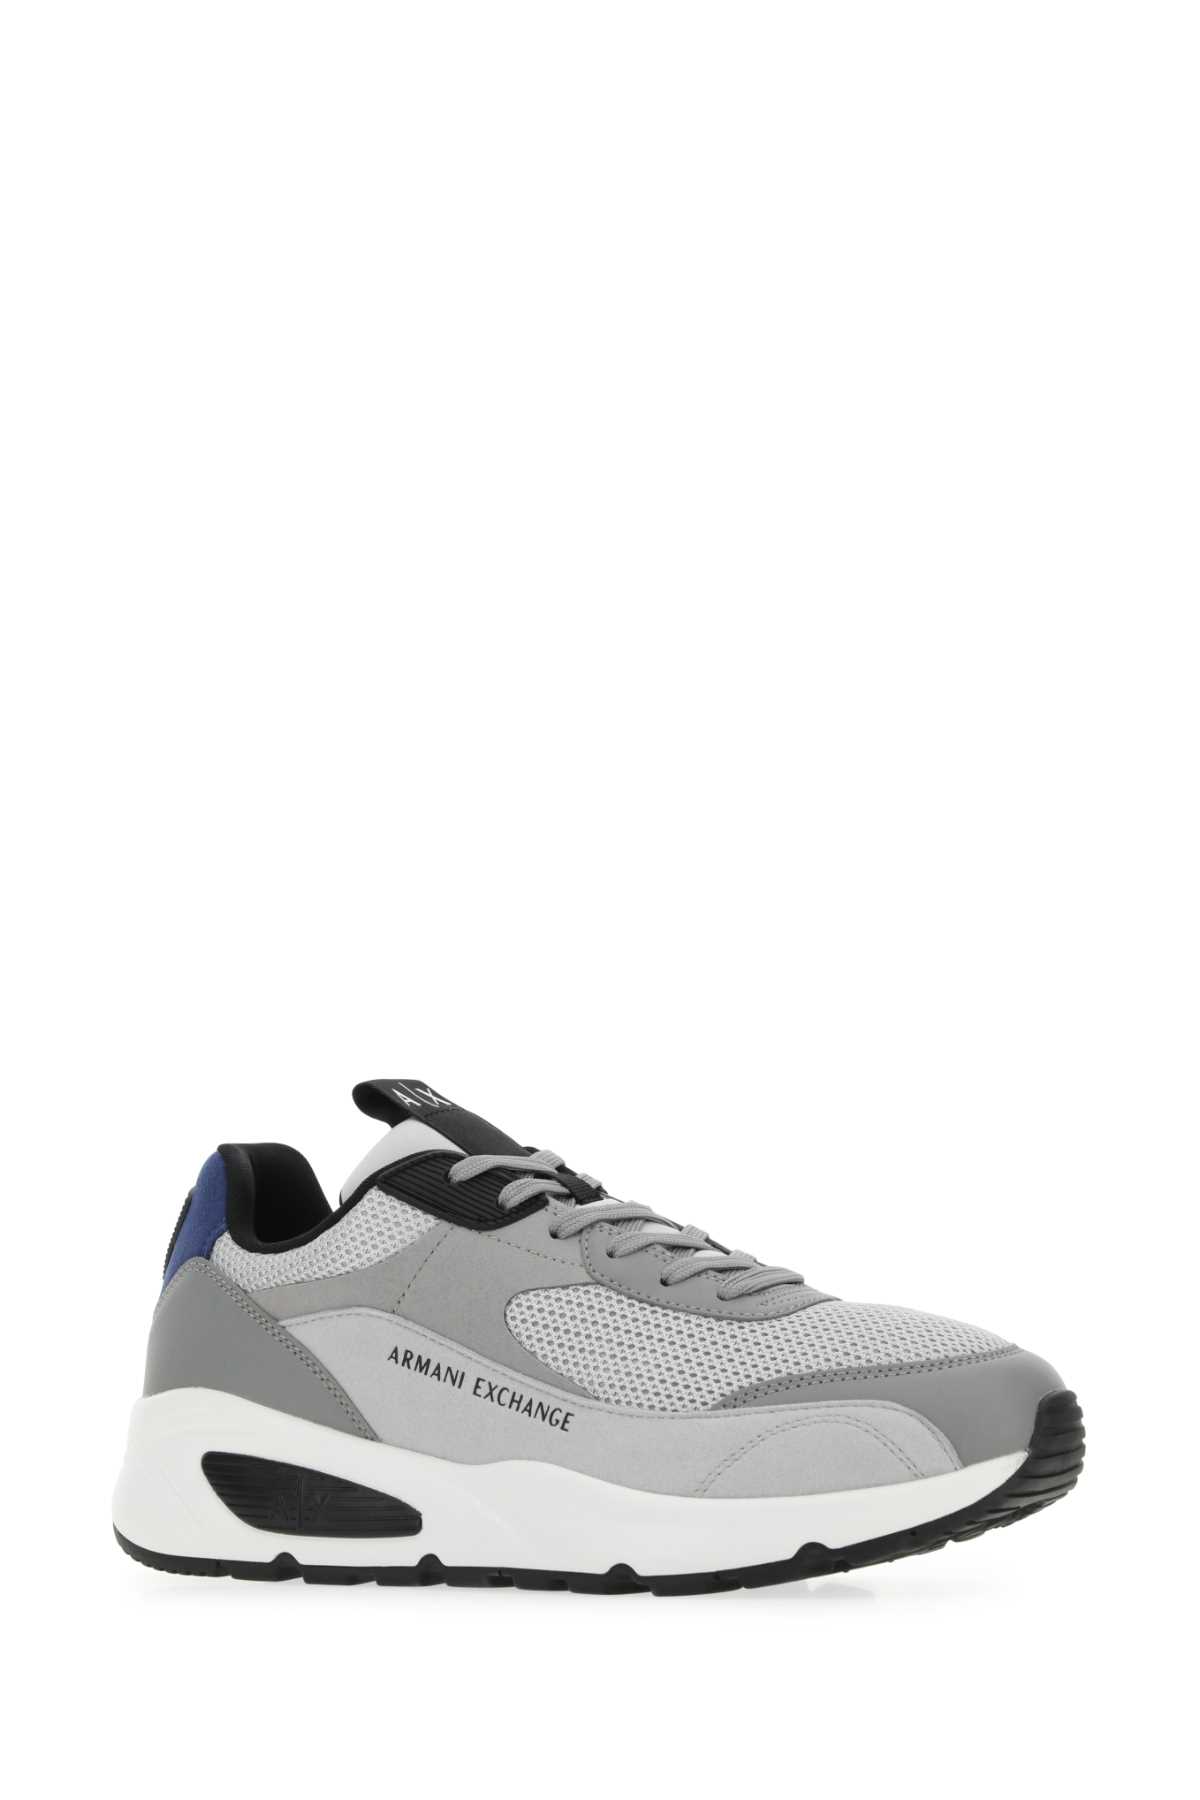 Shop Armani Exchange Grey Fabric And Mesh Sneakers In S280